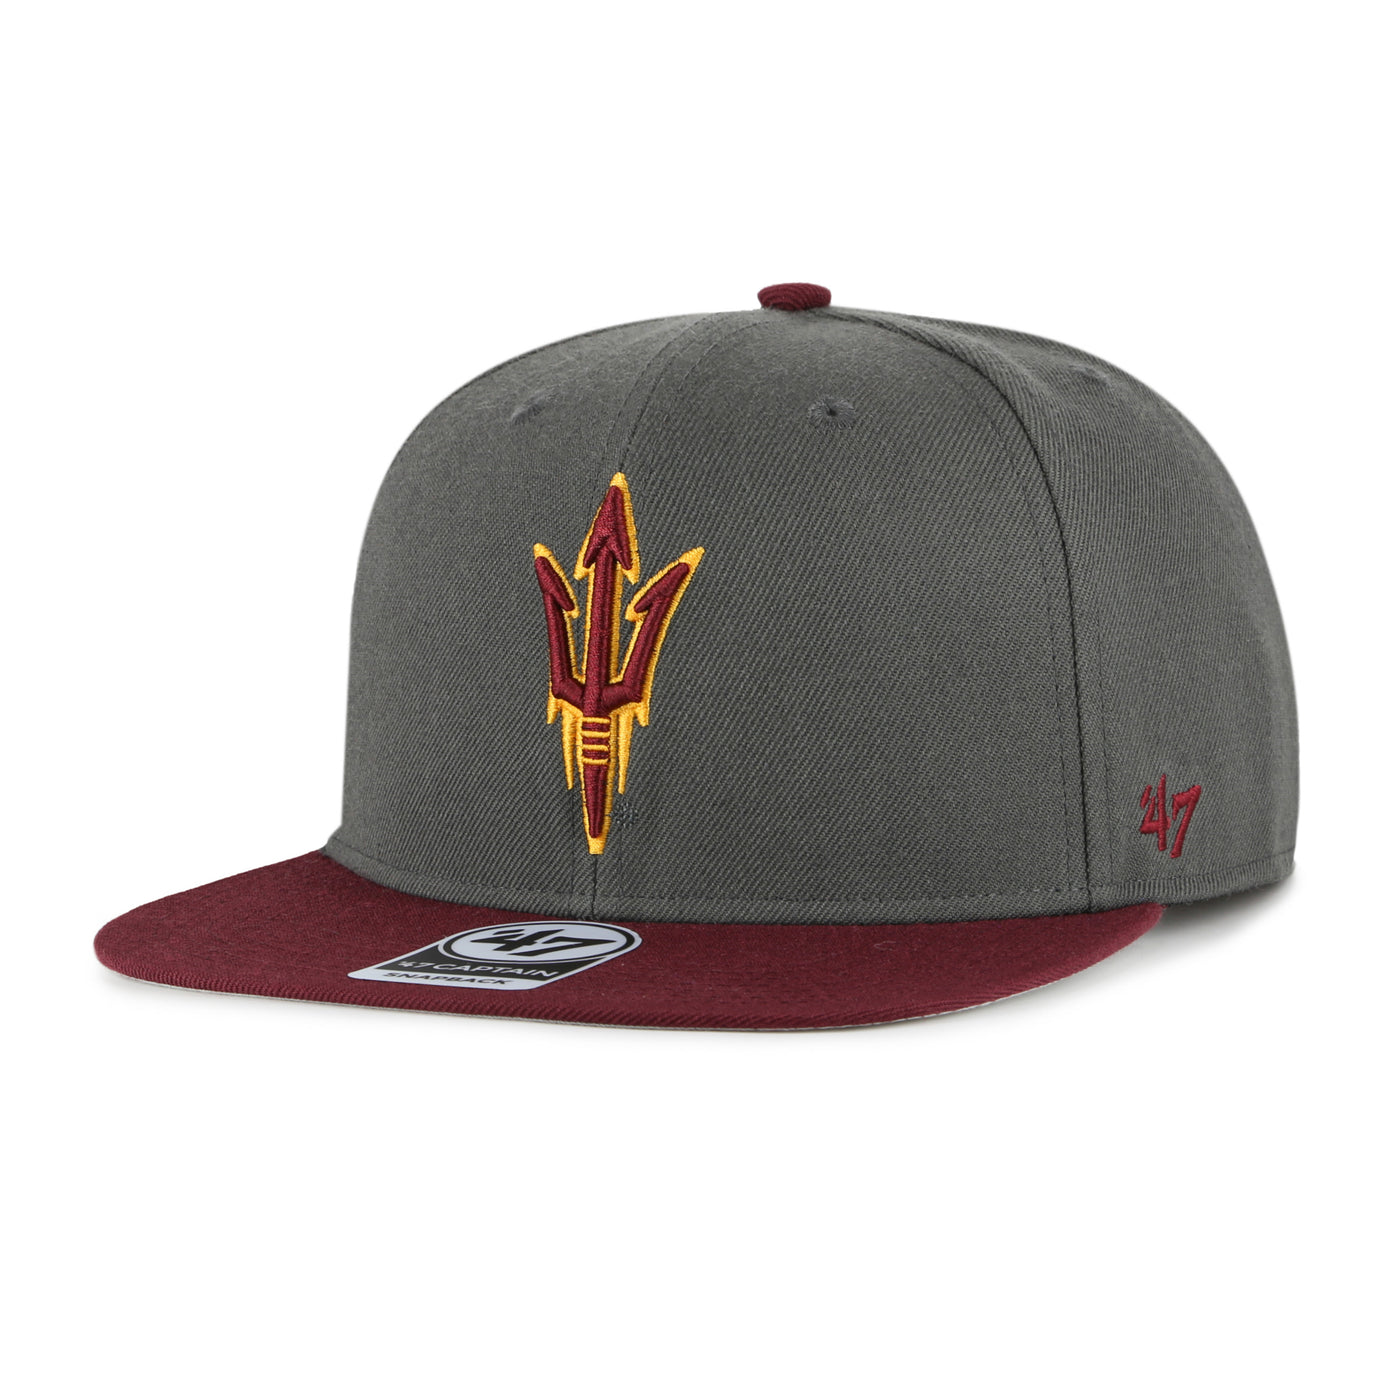 ASU flat-bill hat with maroon brim. Gold and Maroon pitchfork logo on the front. 